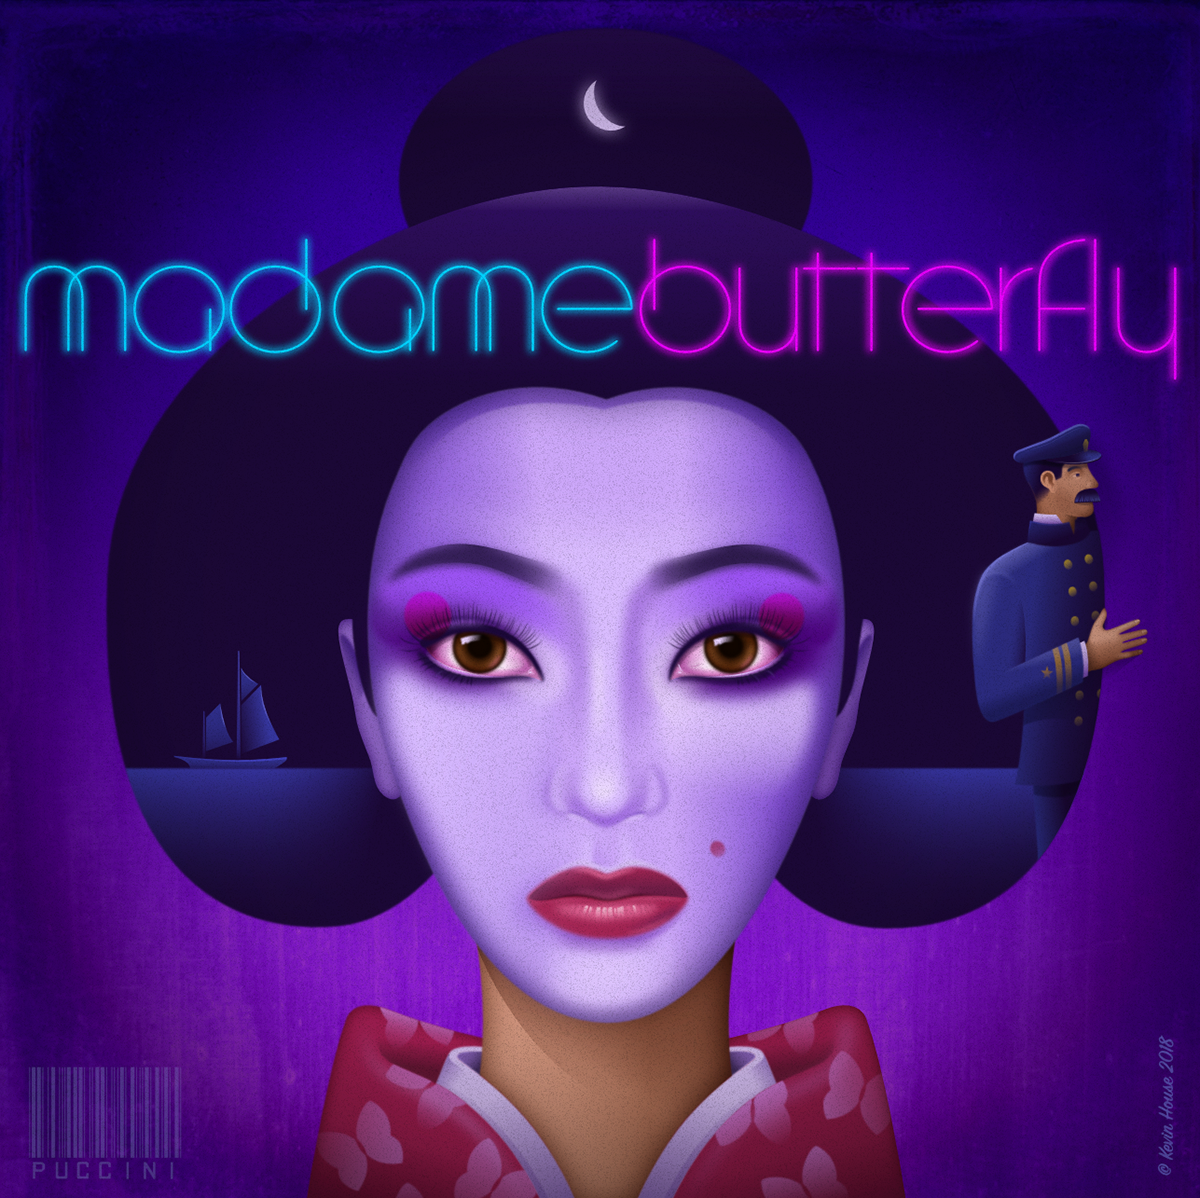 Theatre Madame Butterfly affinity designer portrait play